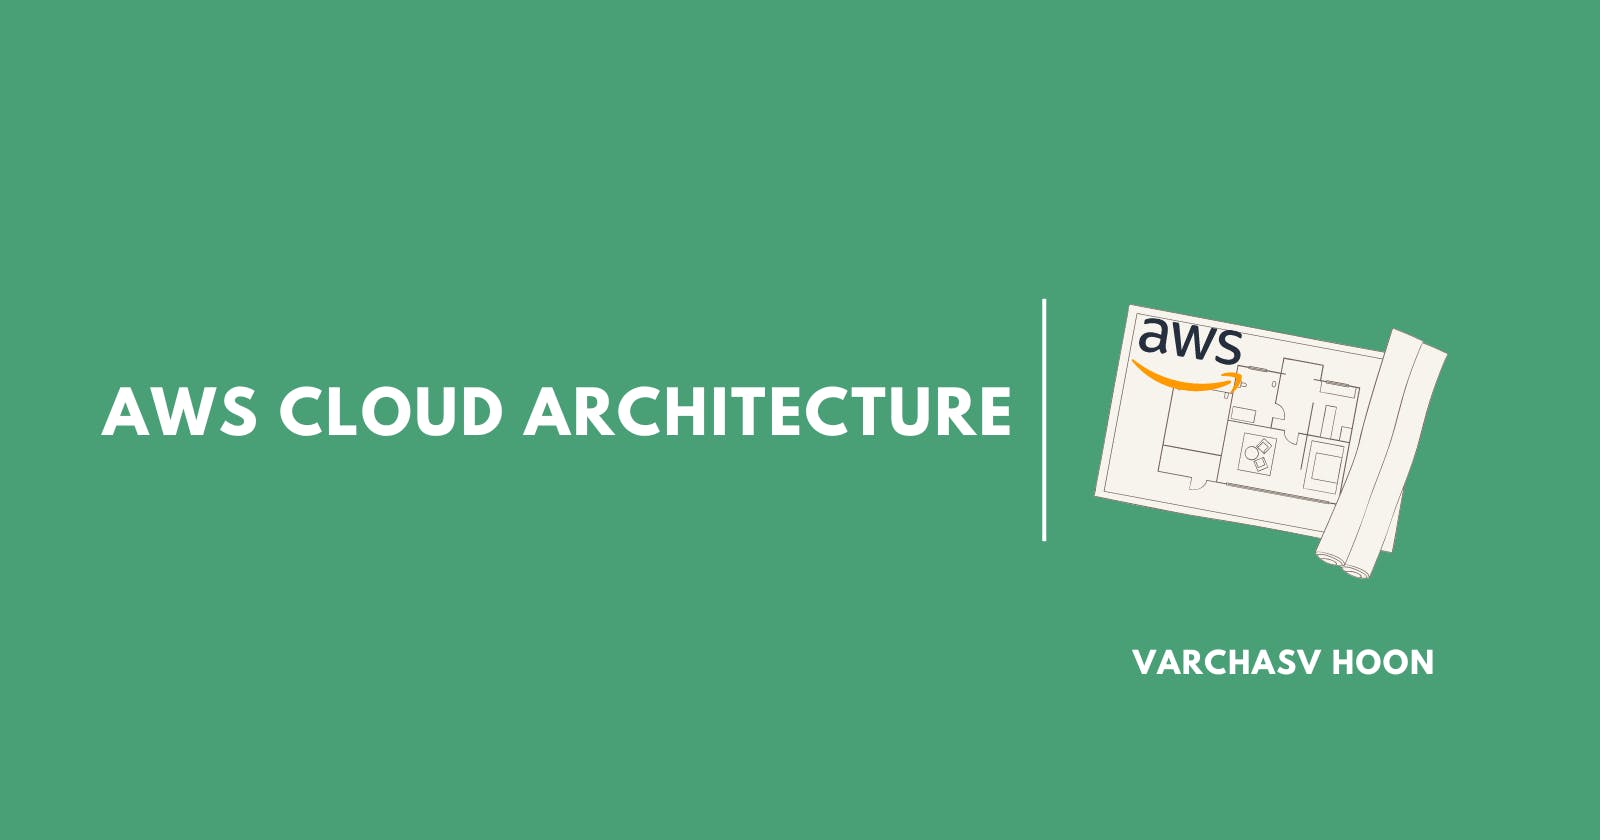 AWS Cloud Architecture and Best Practices | Varchasv Hoon